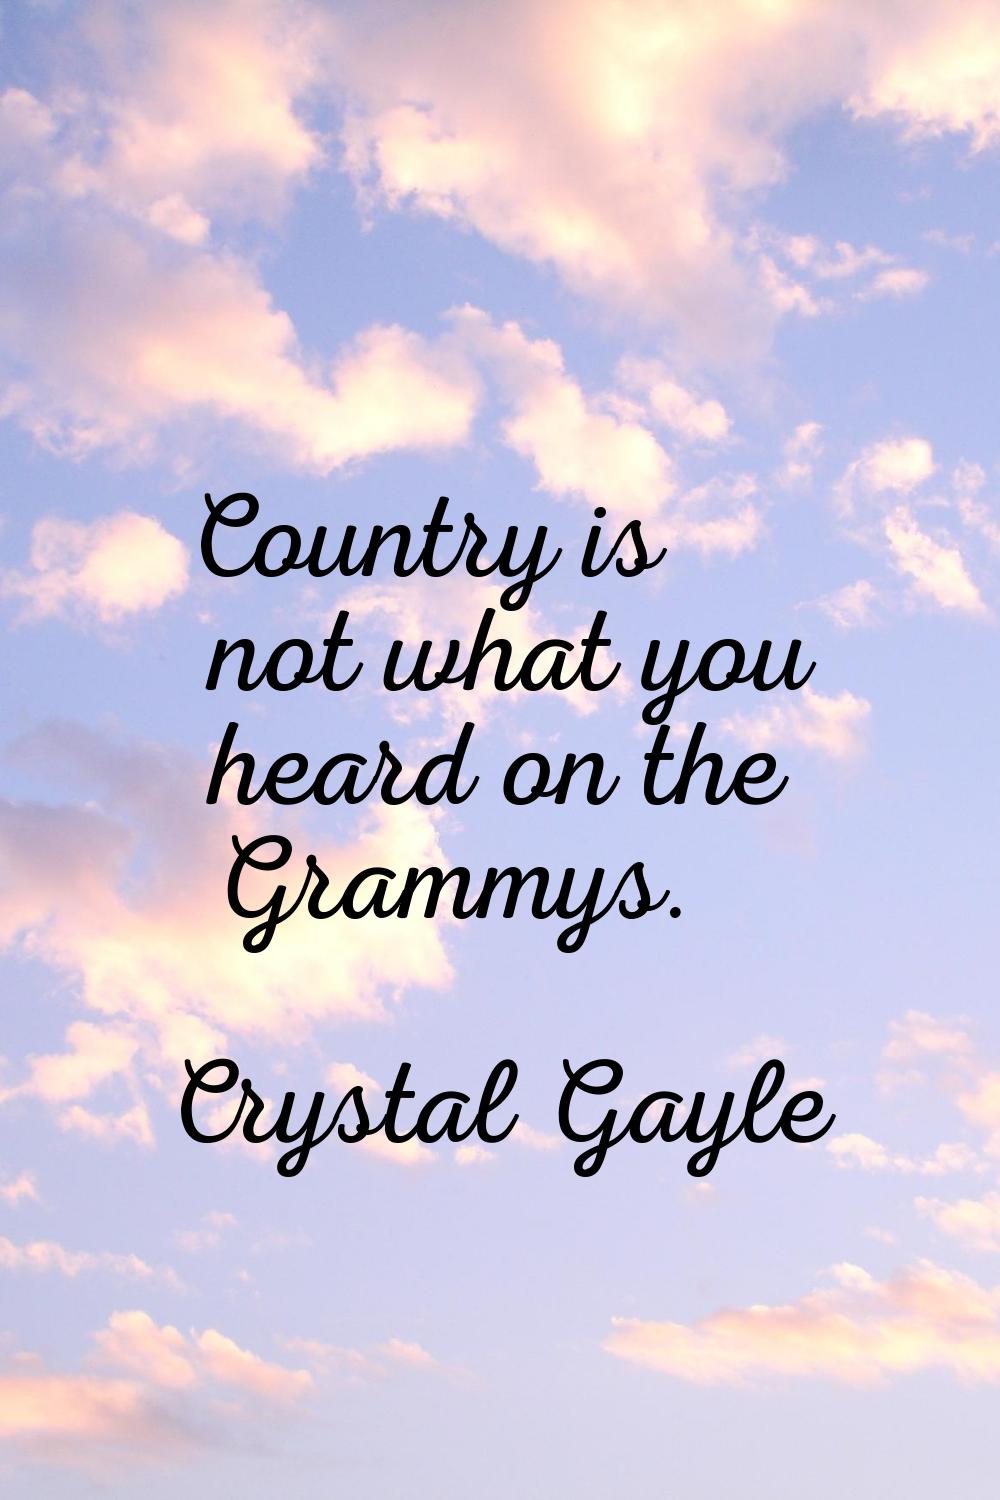 Country is not what you heard on the Grammys.